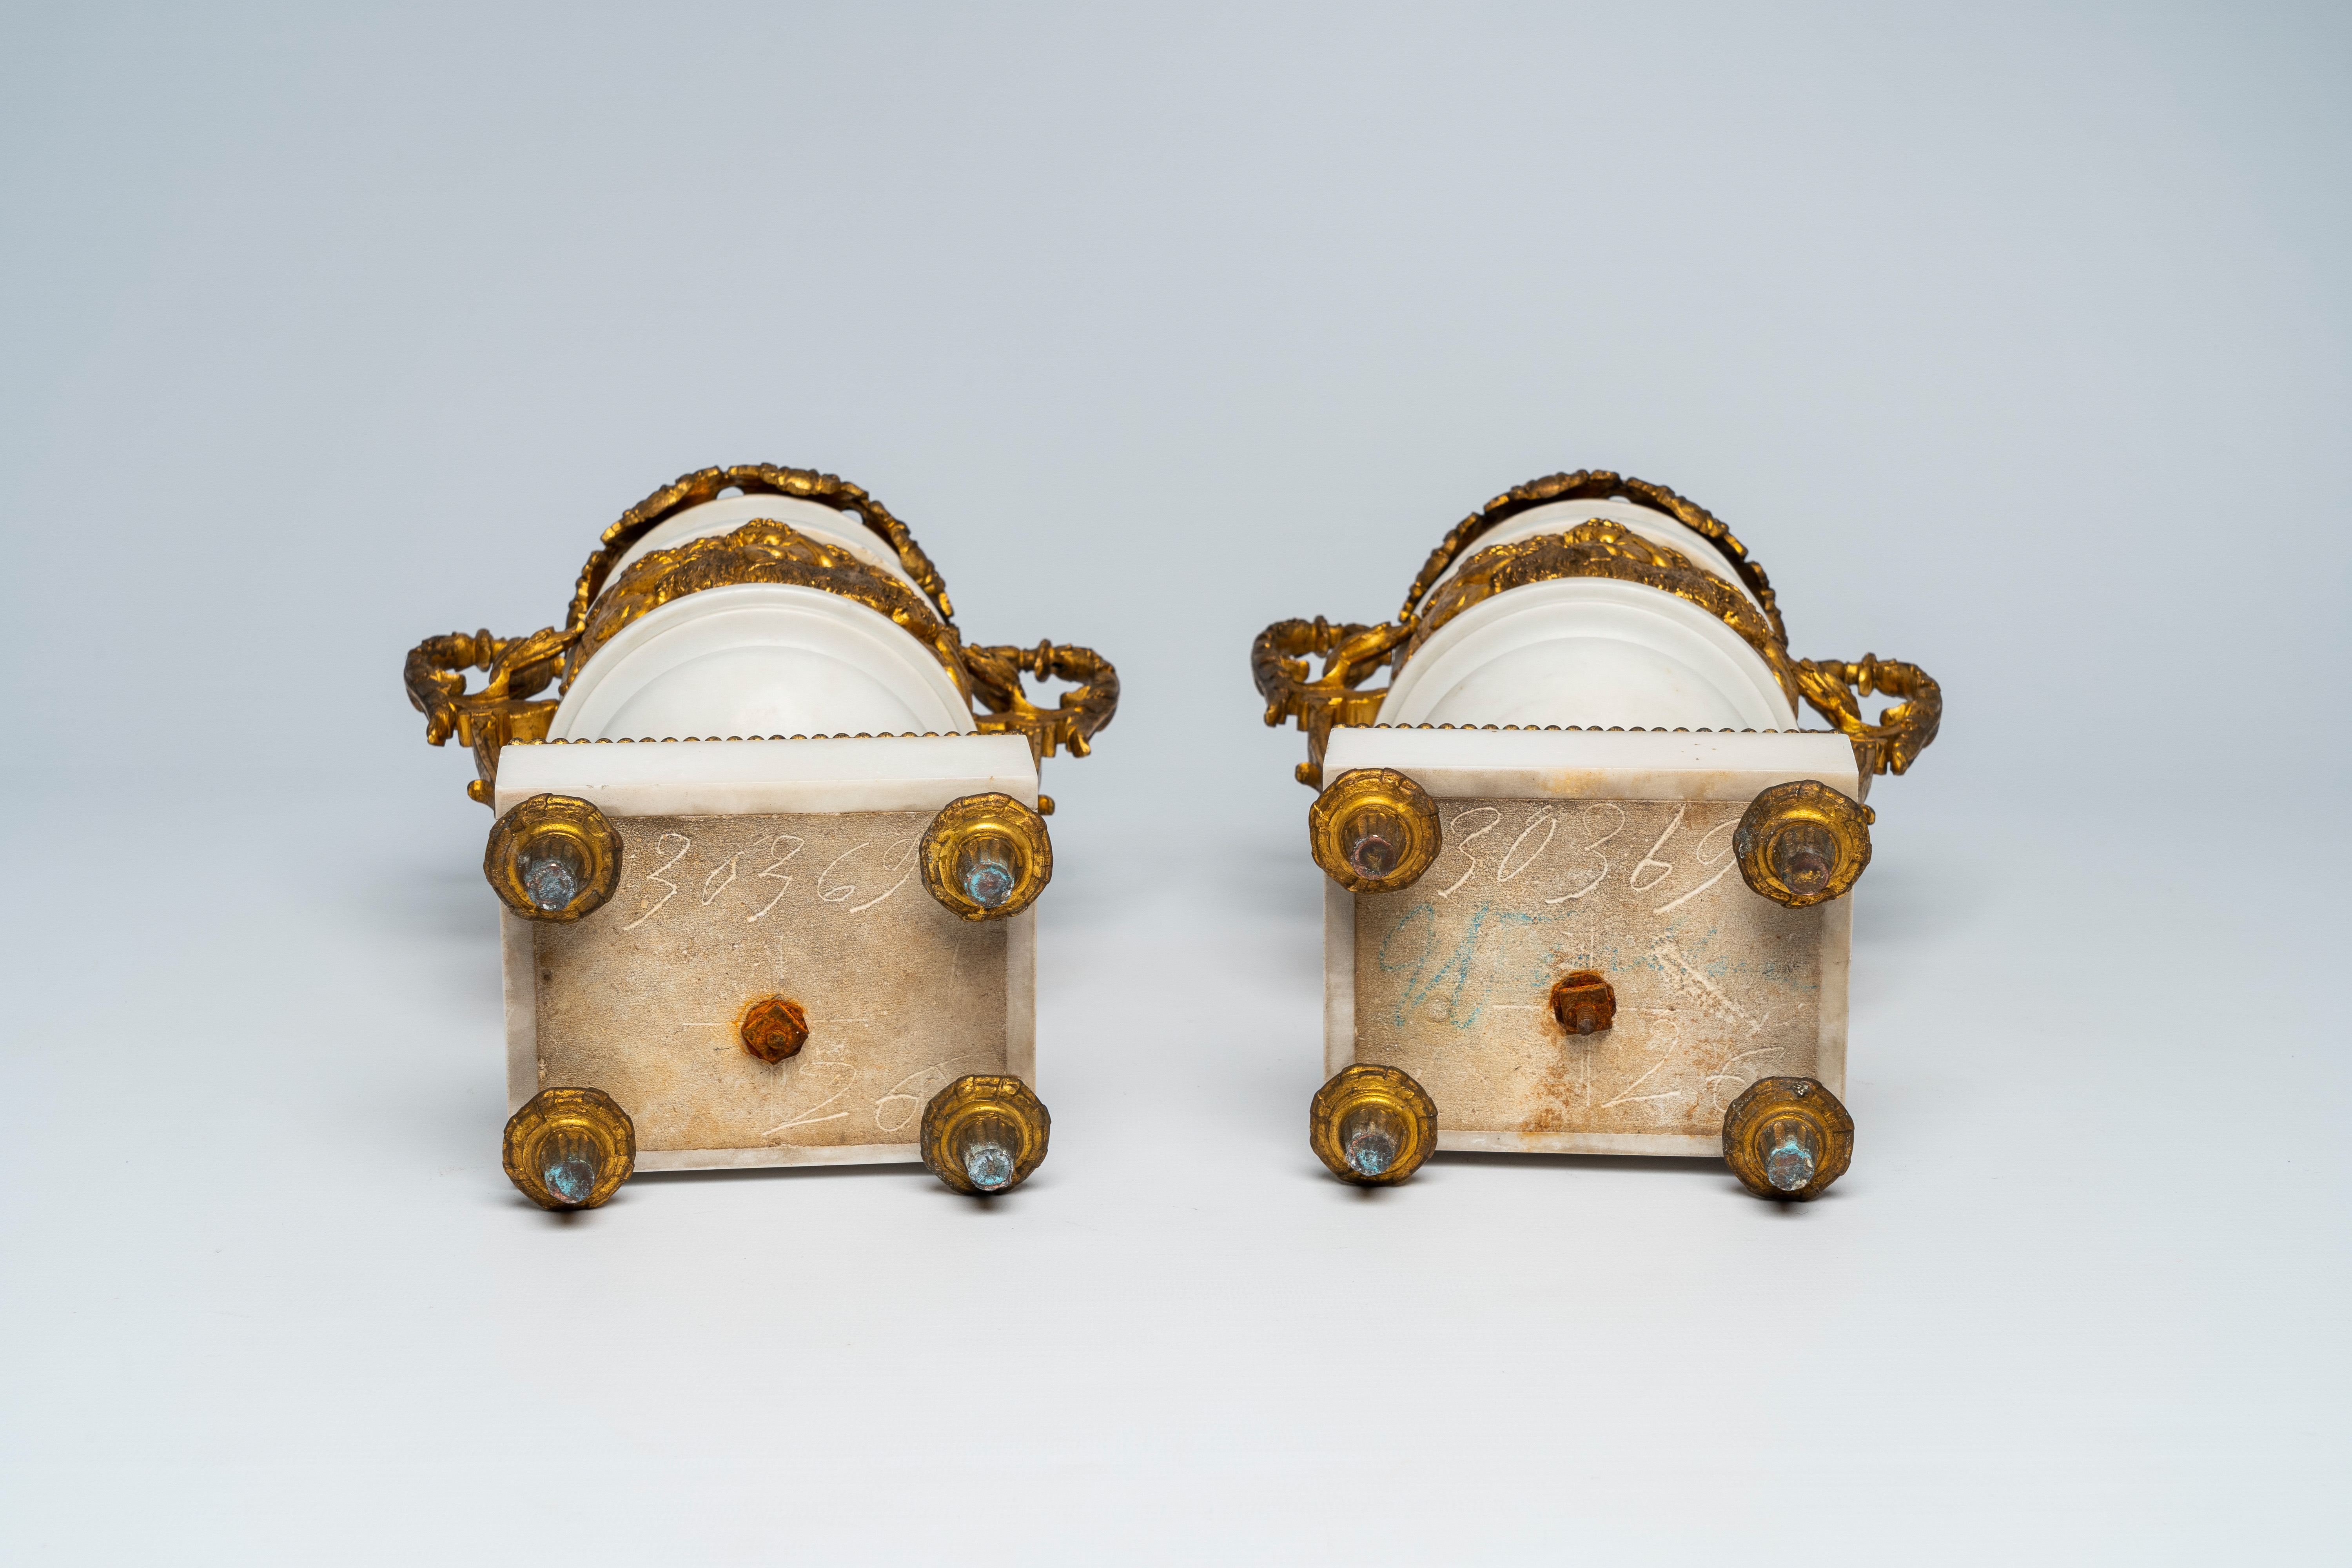 A pair of French gilt mounted white marble vases with relief design of putti, goats and Bacchus them - Image 6 of 7